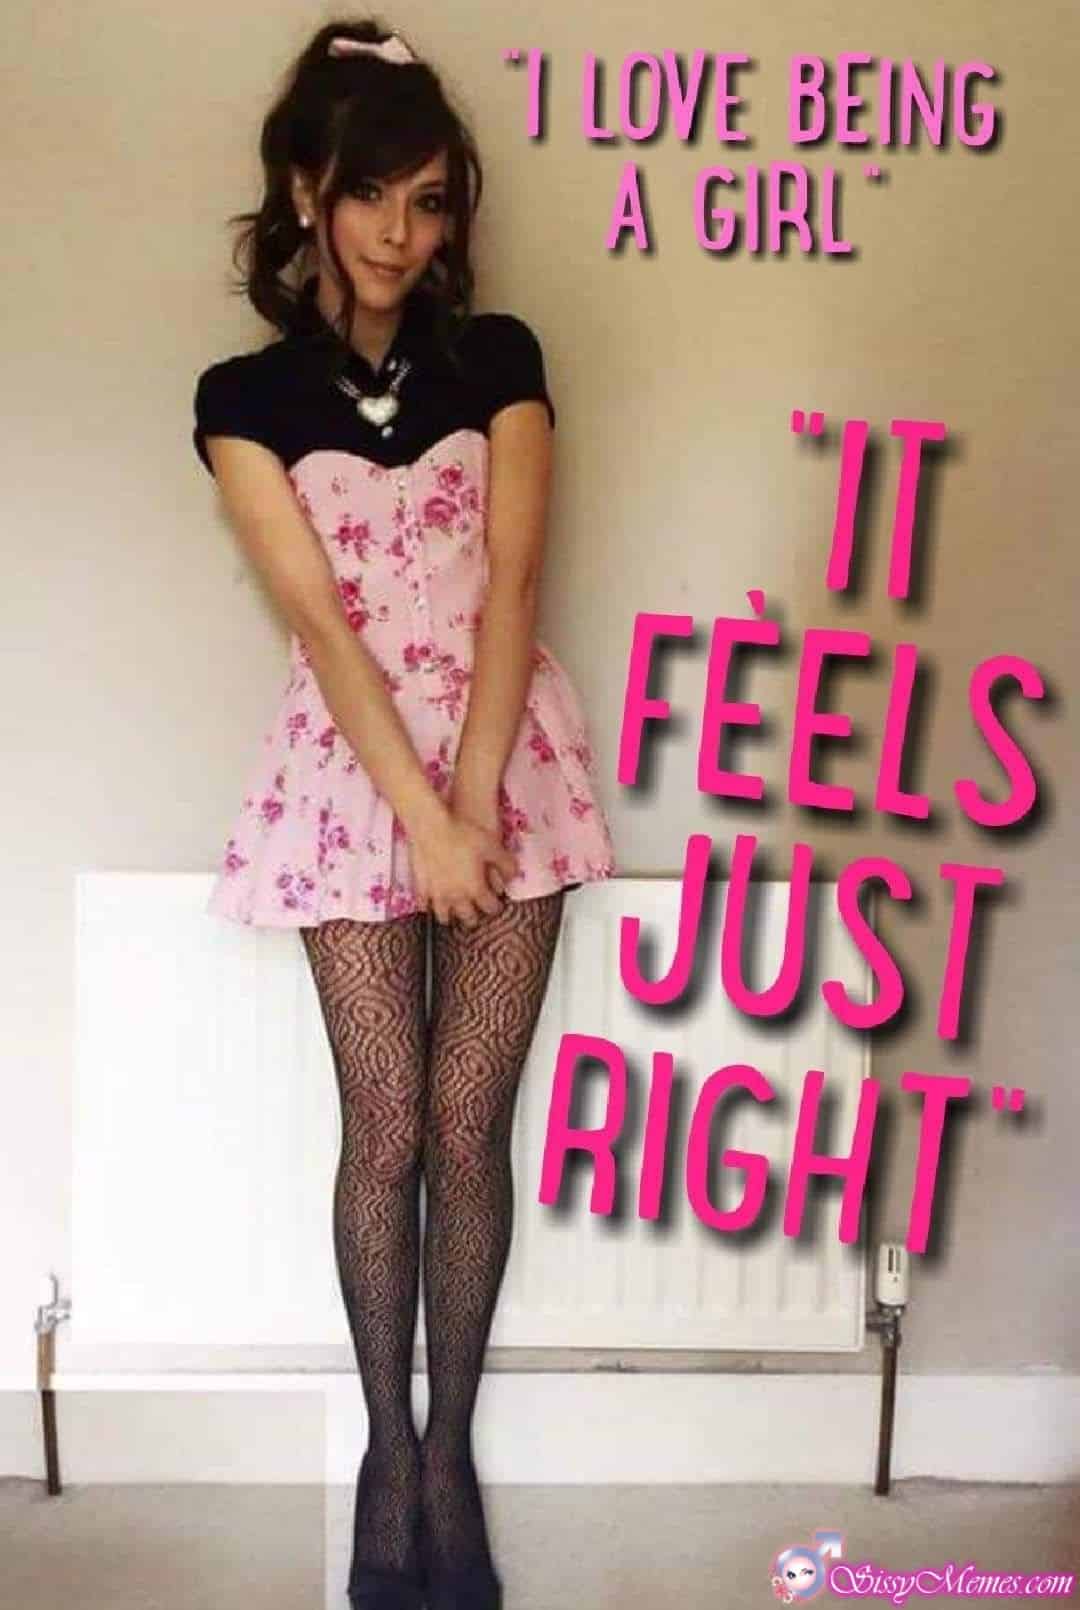 My Favorite Feminization Femboy Asian sissy caption: I LOVE BEING A GIRL. FEELS JUST RIGHT Asian Girlyboy in a Very Cute Pink Dress